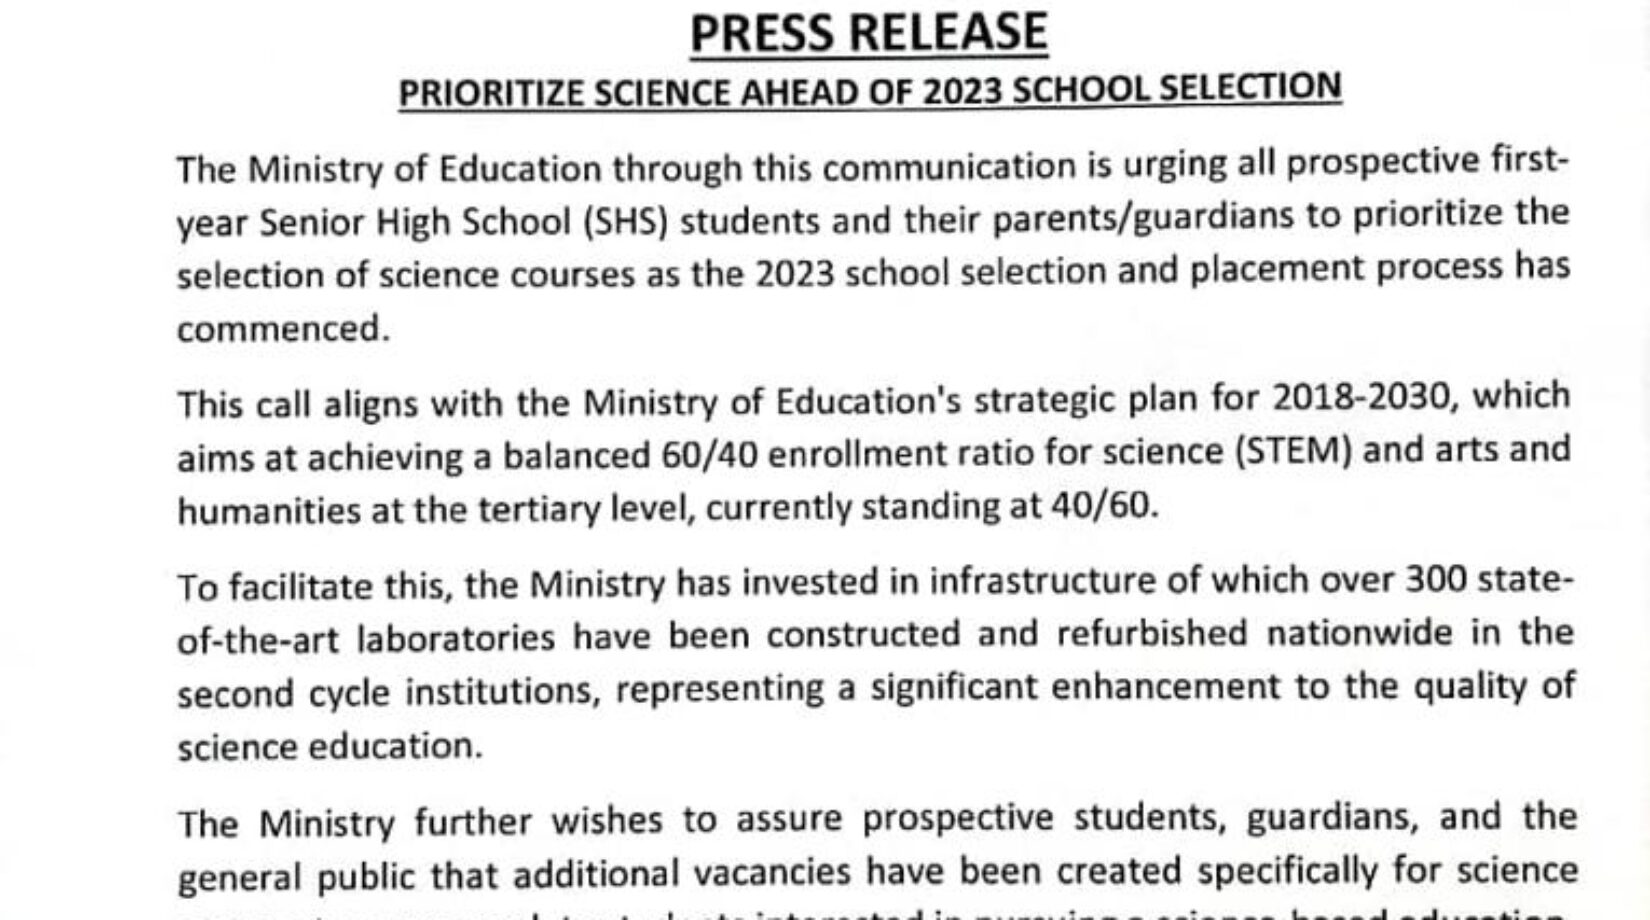 EDUCATION MINISTRY URGES STUDENTS TO PRIORITIZE SCIENCE AHEAD OF 2023 SCHOOL SELECTION